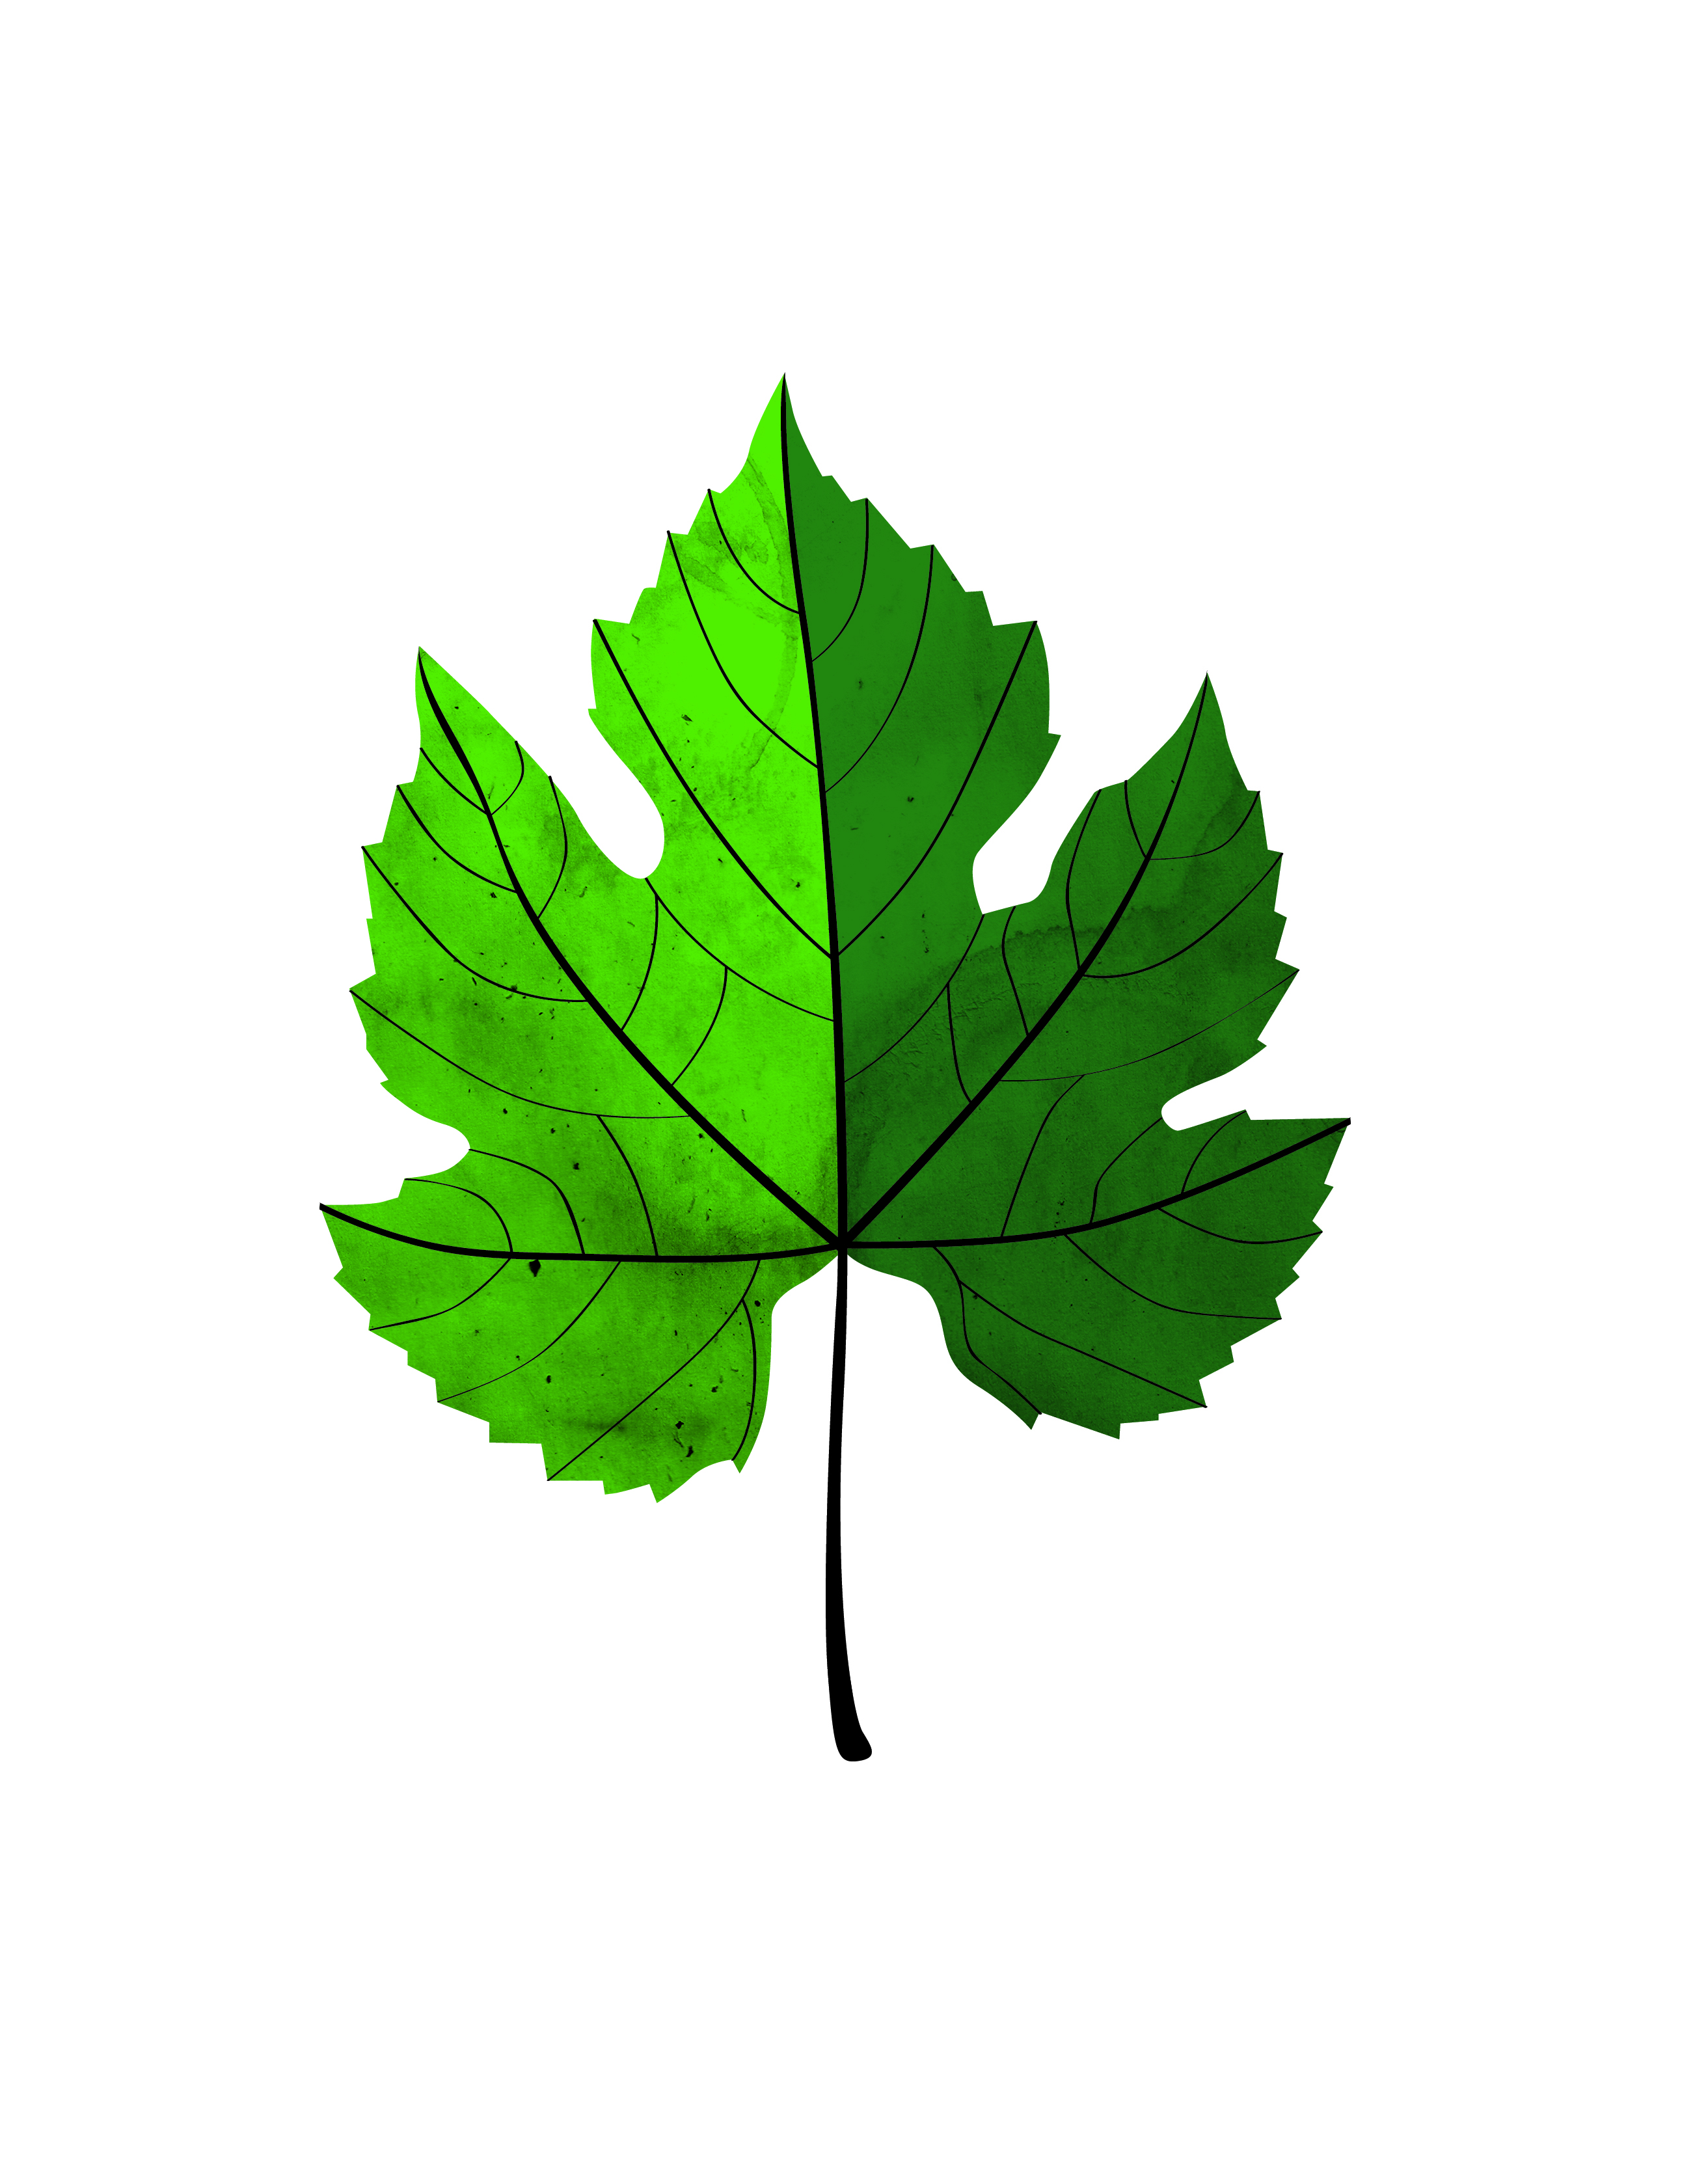 Grape Leaf   Flickr   Photo Sharing    Clipart Best   Clipart Best